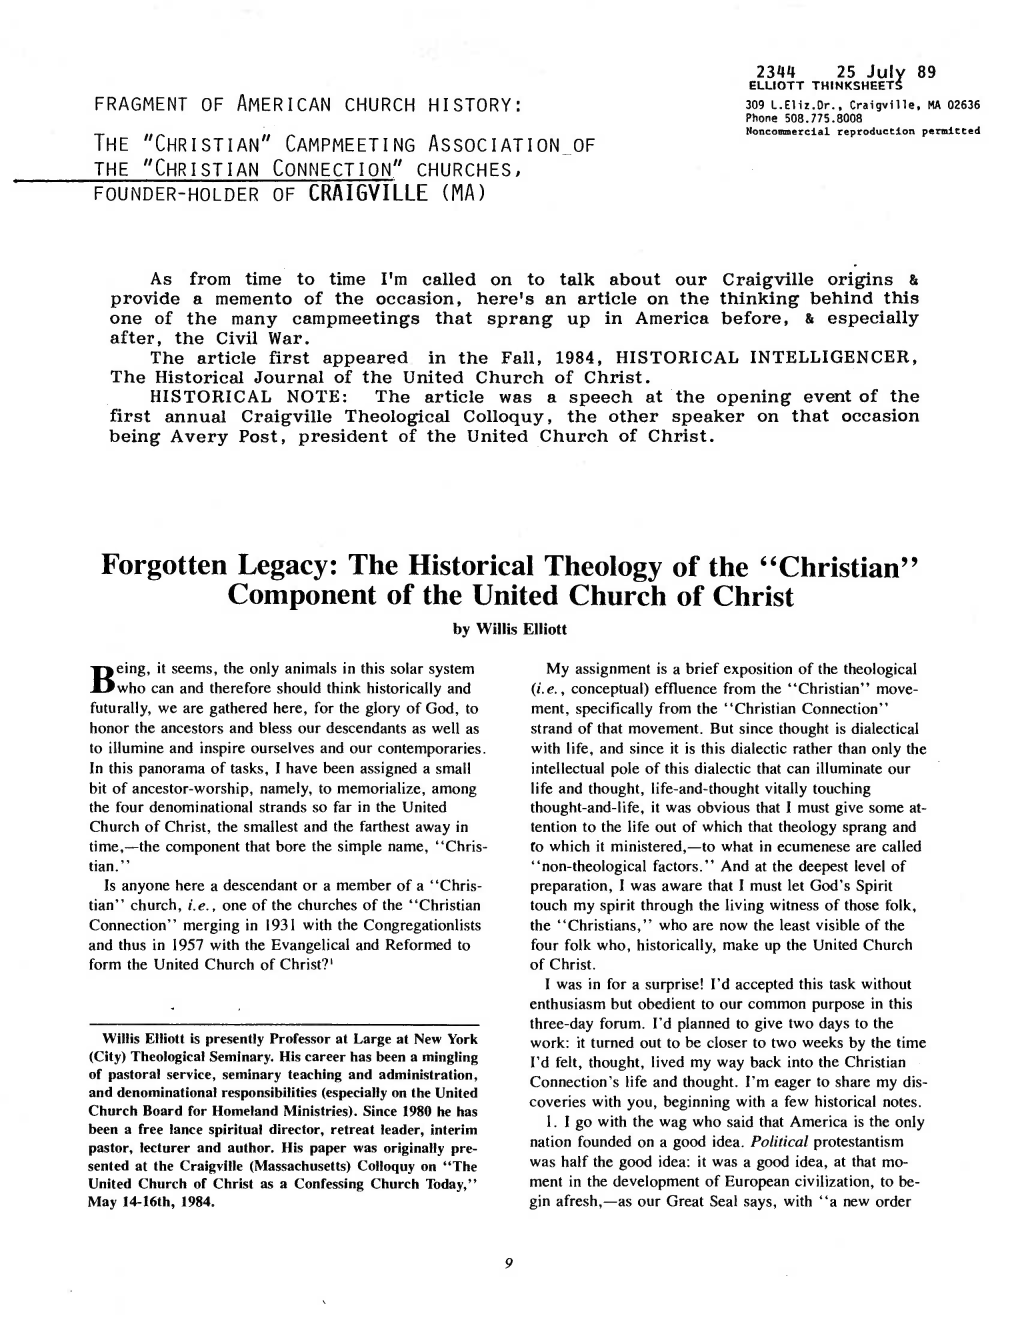 Forgotten Legacy: the Historical Theology of the "Christian" Component of the United Church of Christ by Willis Elliott